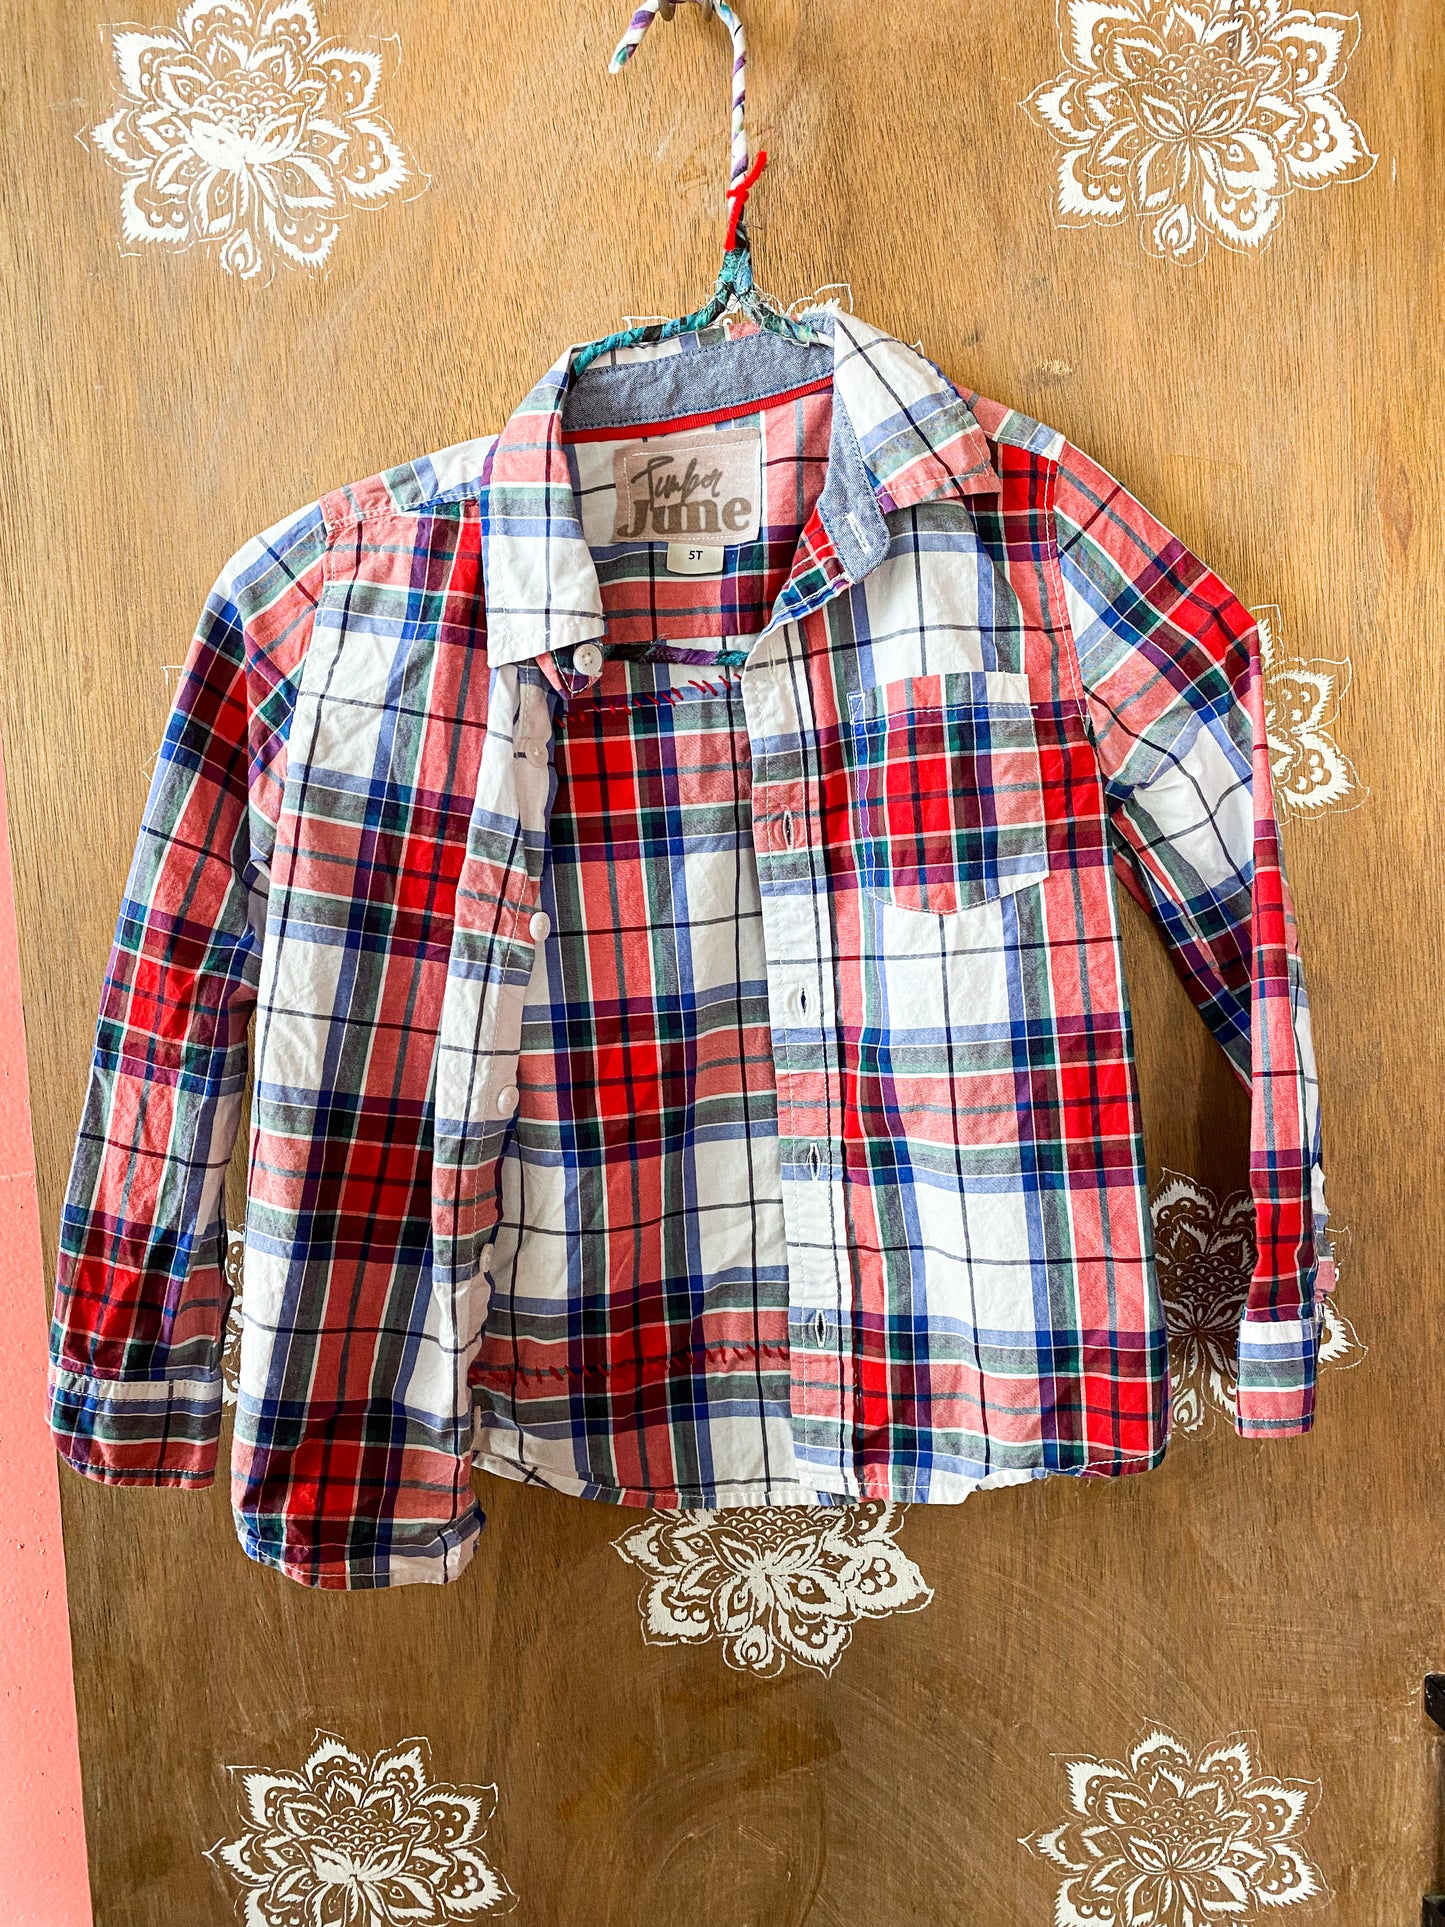 Bruce Concert kids upcycled plaid flannel size 5T